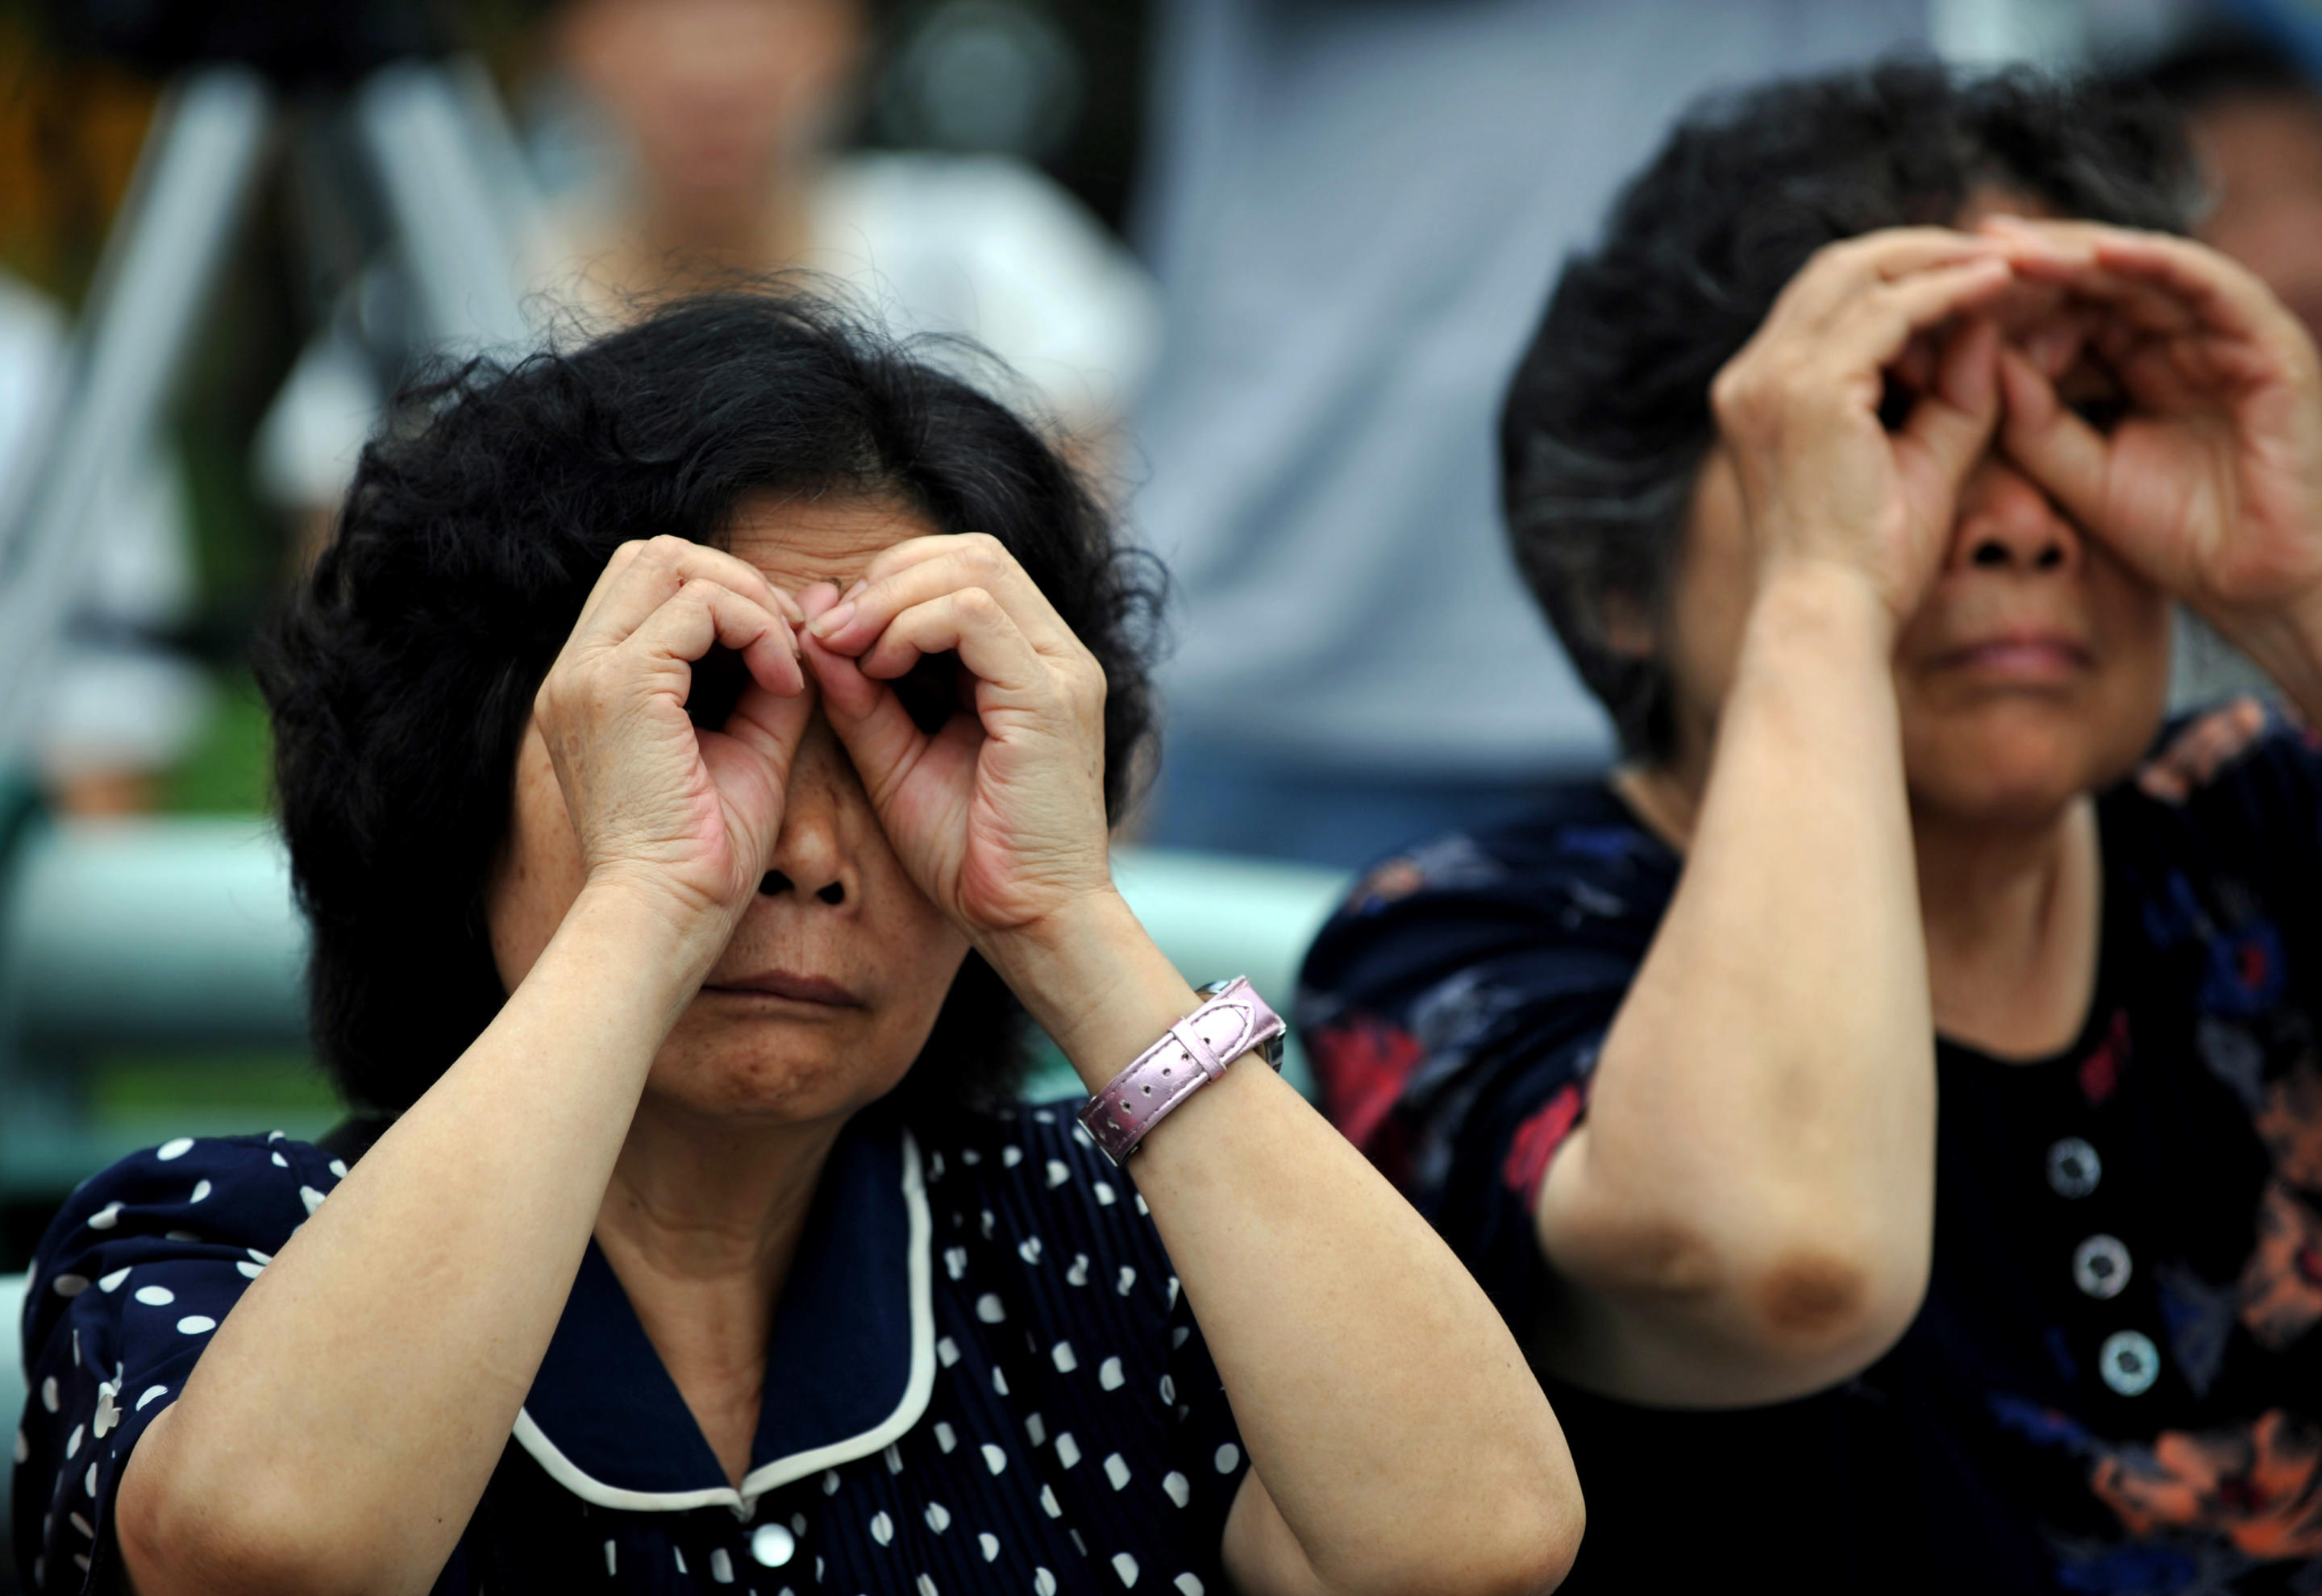 2009: People observe a total solar eclipse in Chengdu, China. 